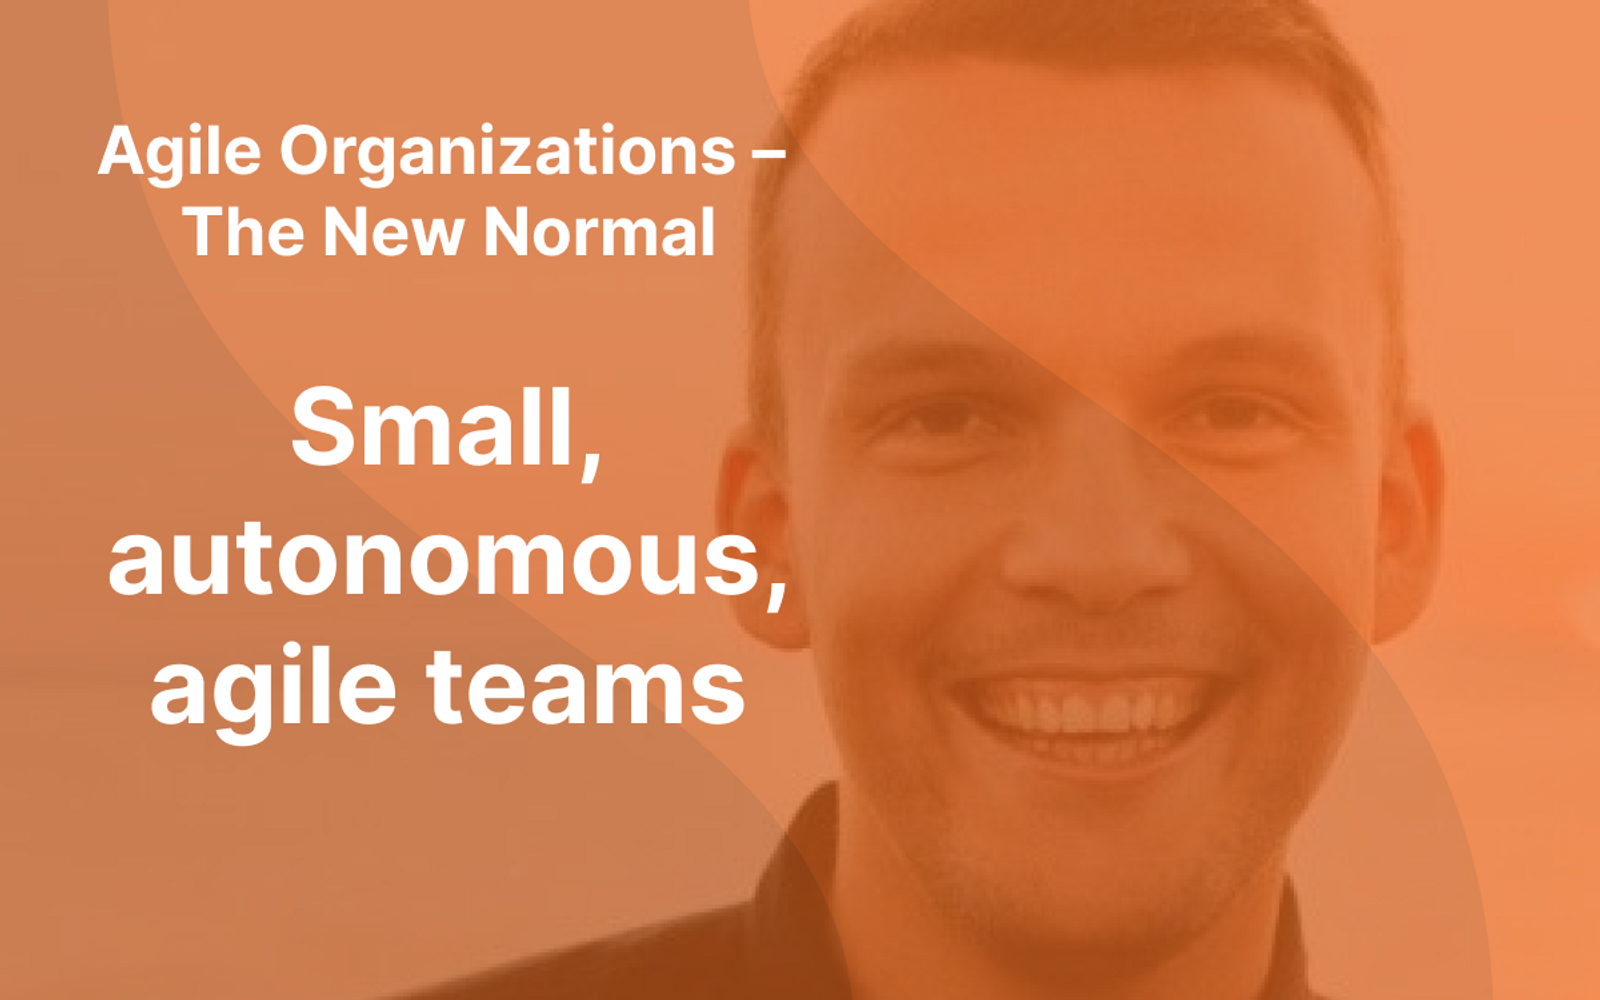 Picture of Sindre Suphellen with orange overlay and the text "Agile Organizations - The New Normal" and "Small, autonomous, agile teams" written in white